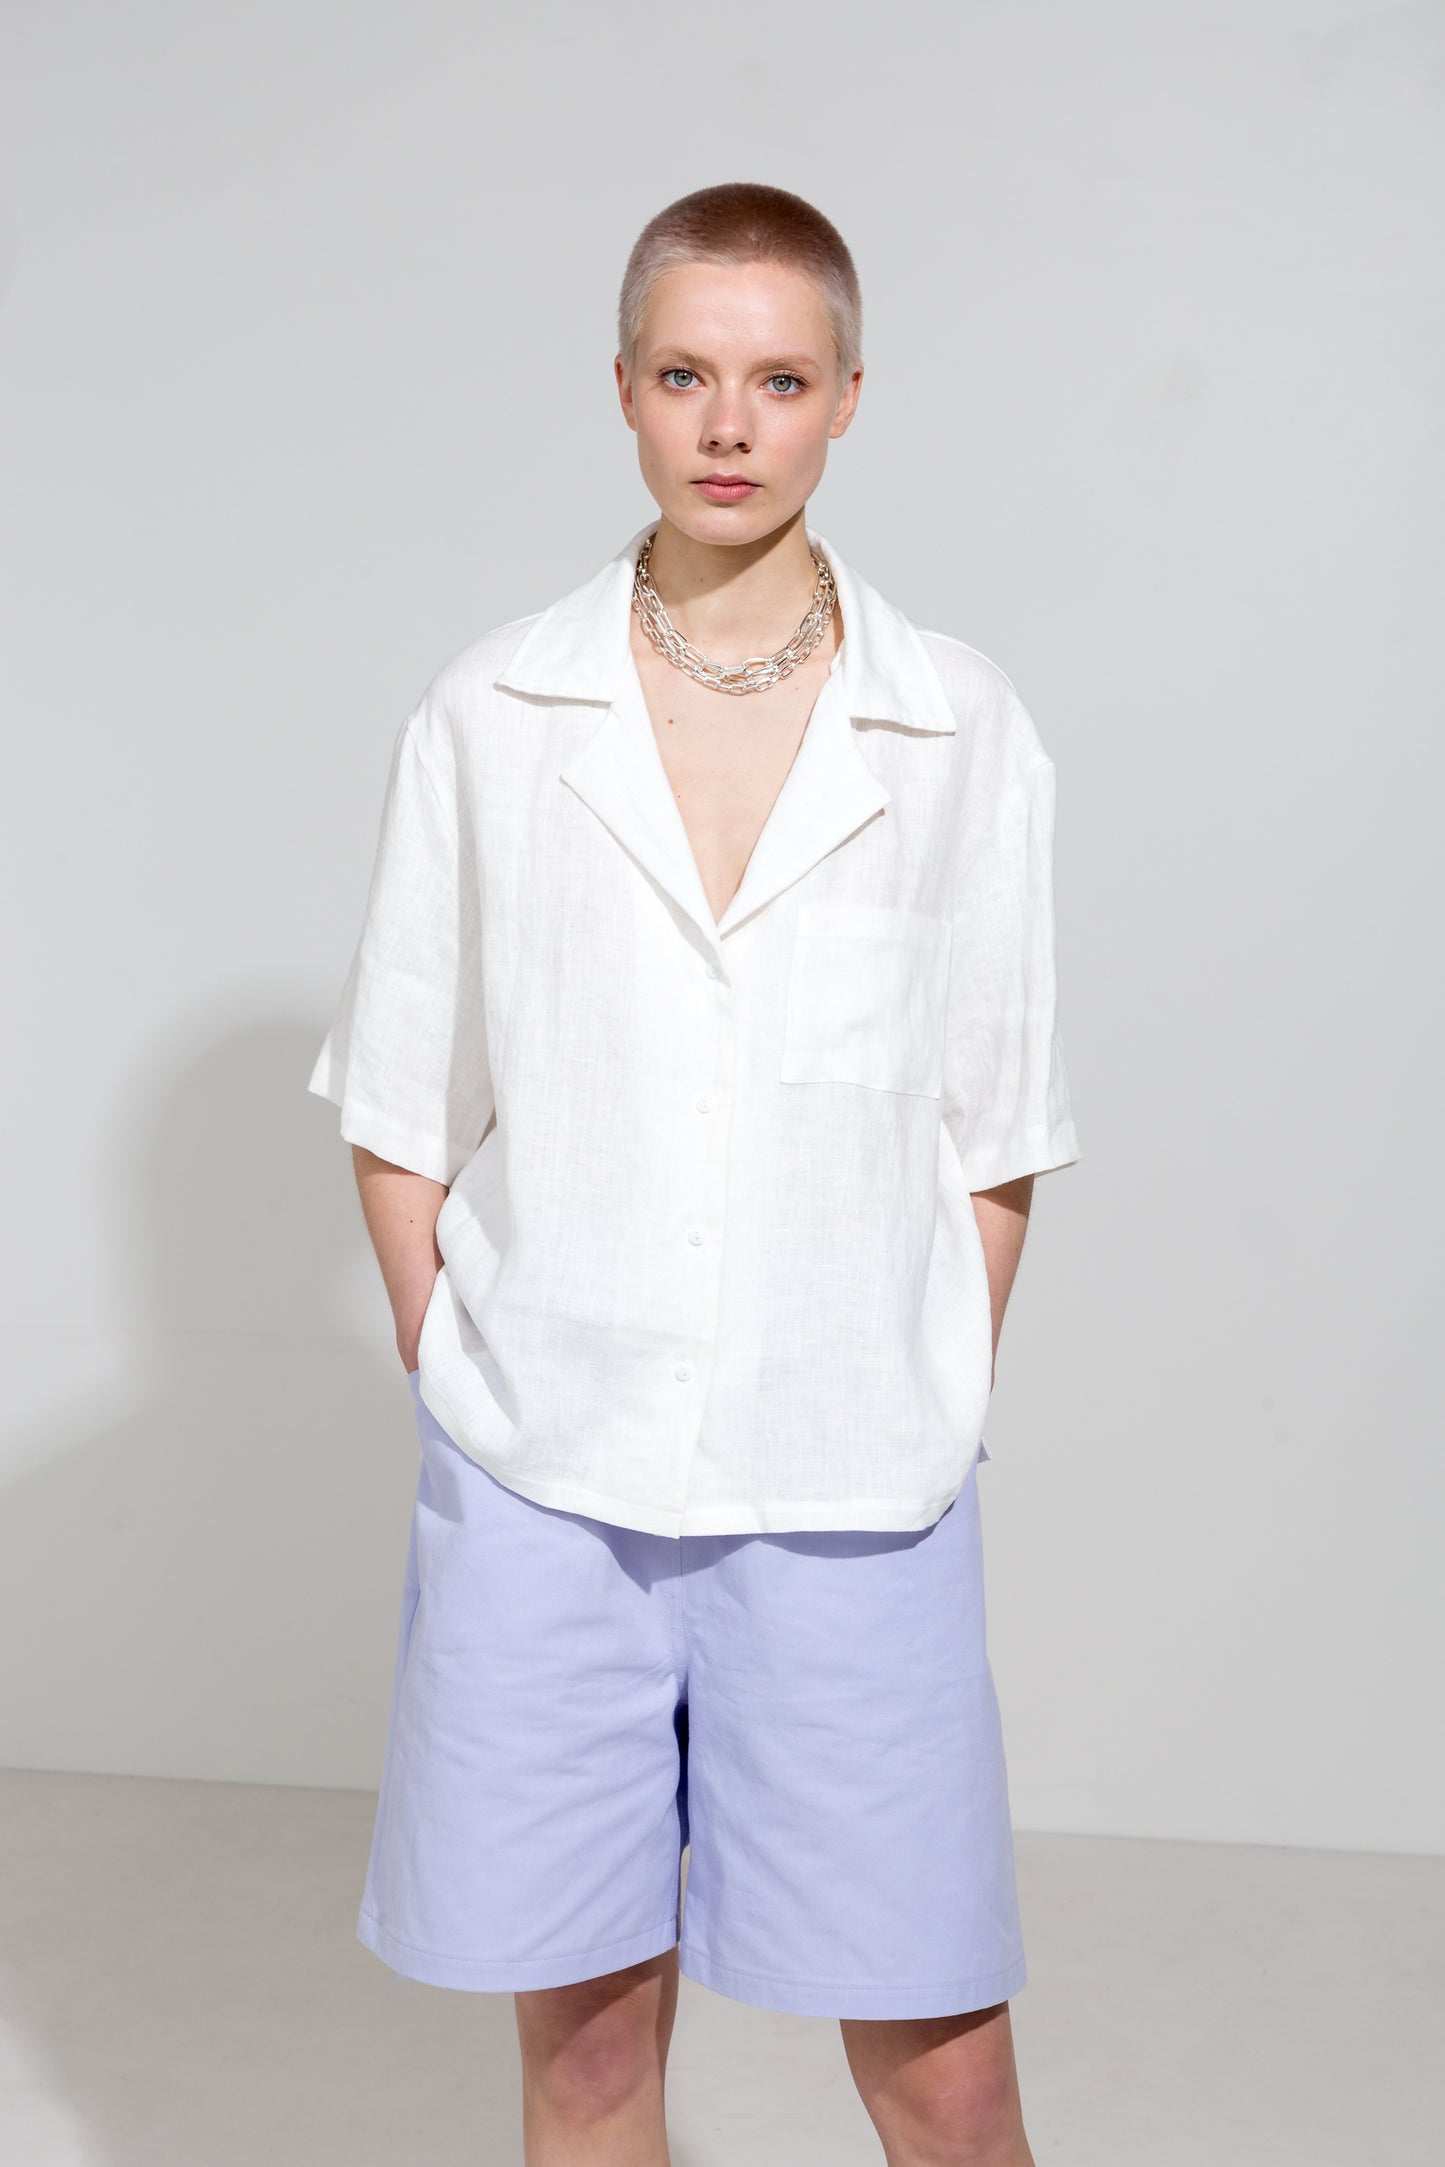 Open collar short sleeve shirt in white linen and lilac workwear shorts in organic cotton